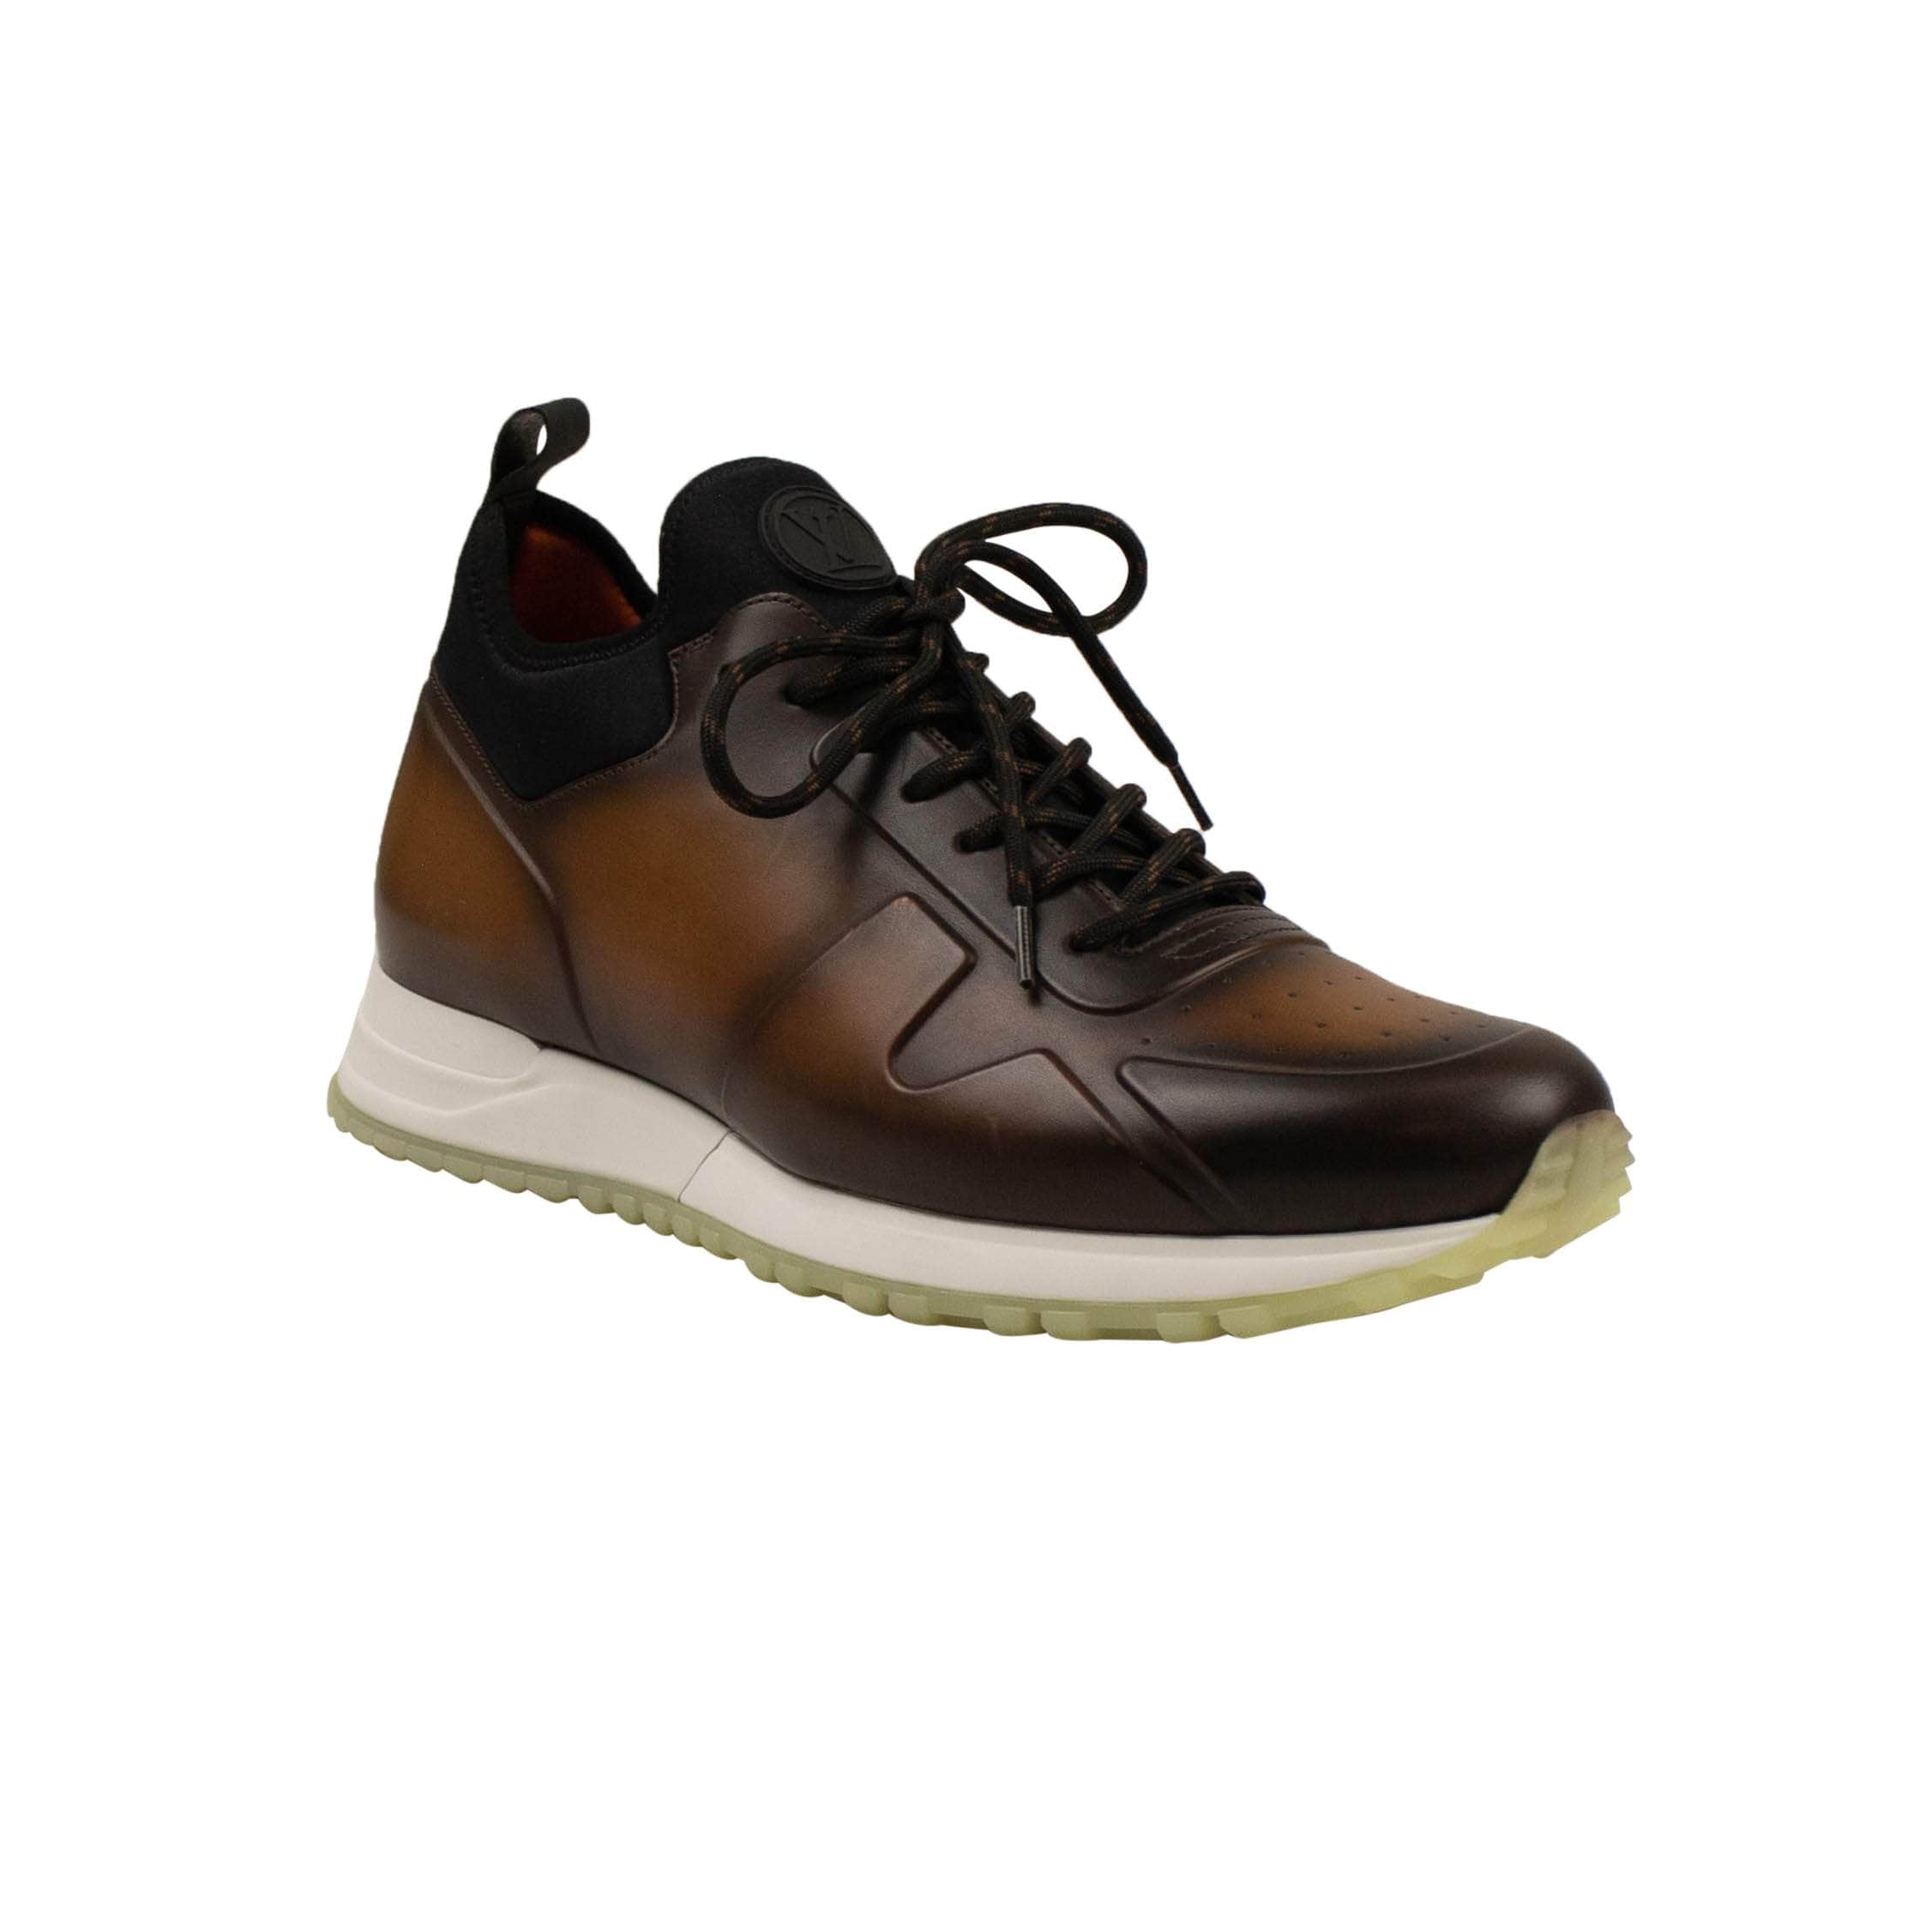 Louis Vuitton 500-750, channelenable-all, chicmi, couponcollection, gender-mens, main-shoes, mens-oxfords-derby-shoes, mens-shoes, MixedApparel, size-7-5, SPO, stadiumgoods 7.5 Brown Dyed Leather Derby Lace Up Sneakers 95-LVT-2056/7.5 95-LVT-2056/7.5